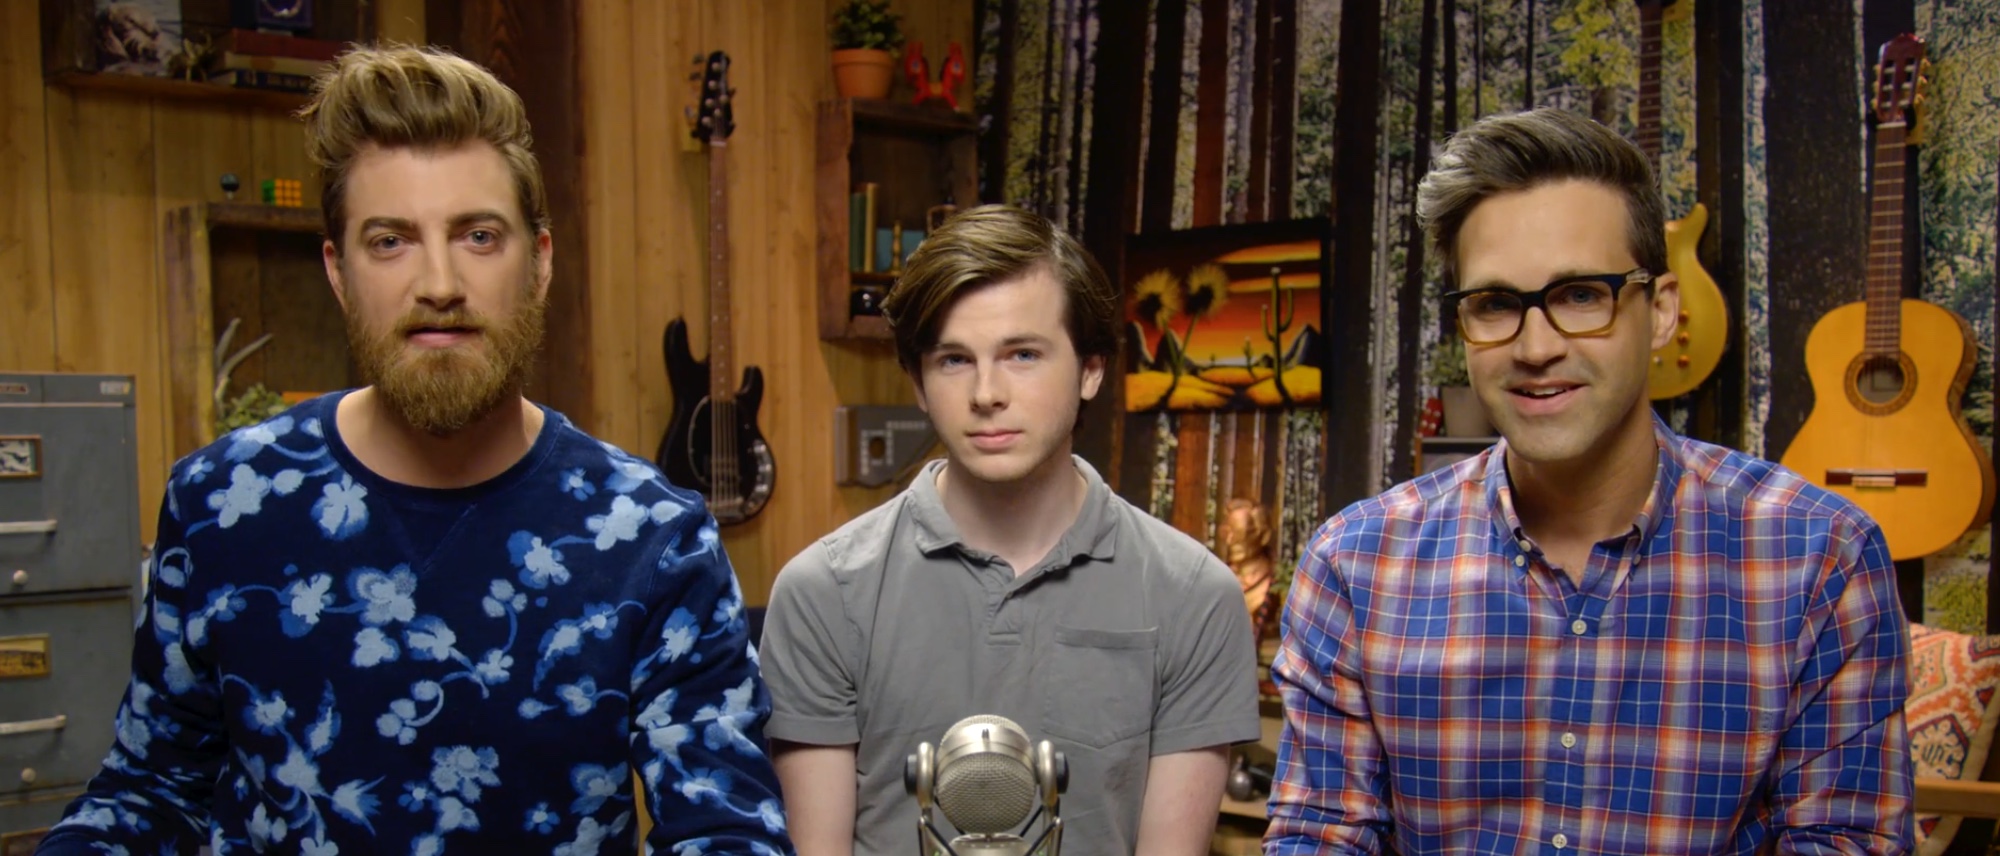 Chandler Riggs in Good Mythical Morning